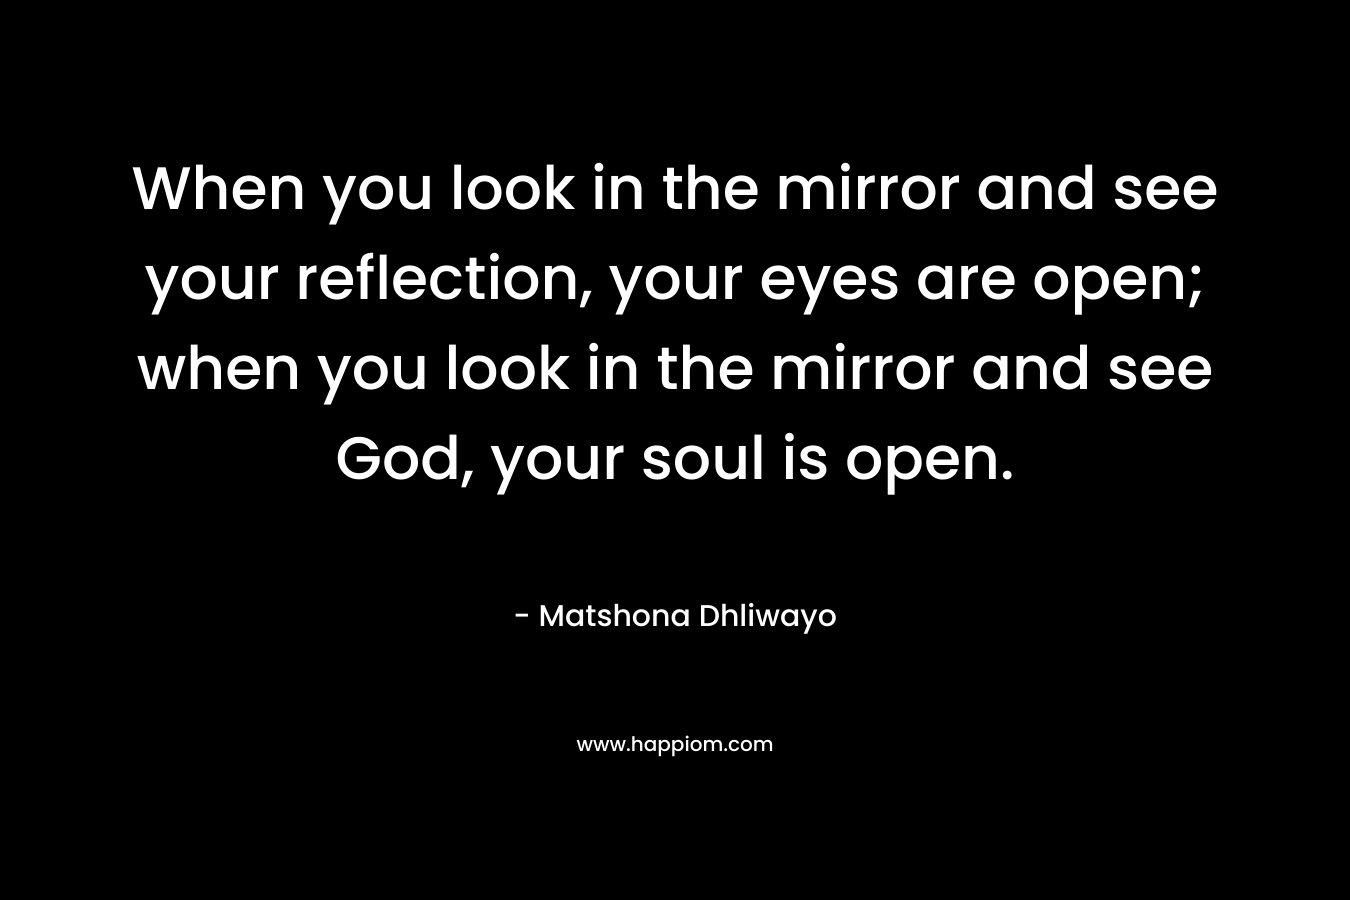 When you look in the mirror and see your reflection, your eyes are open; when you look in the mirror and see God, your soul is open.